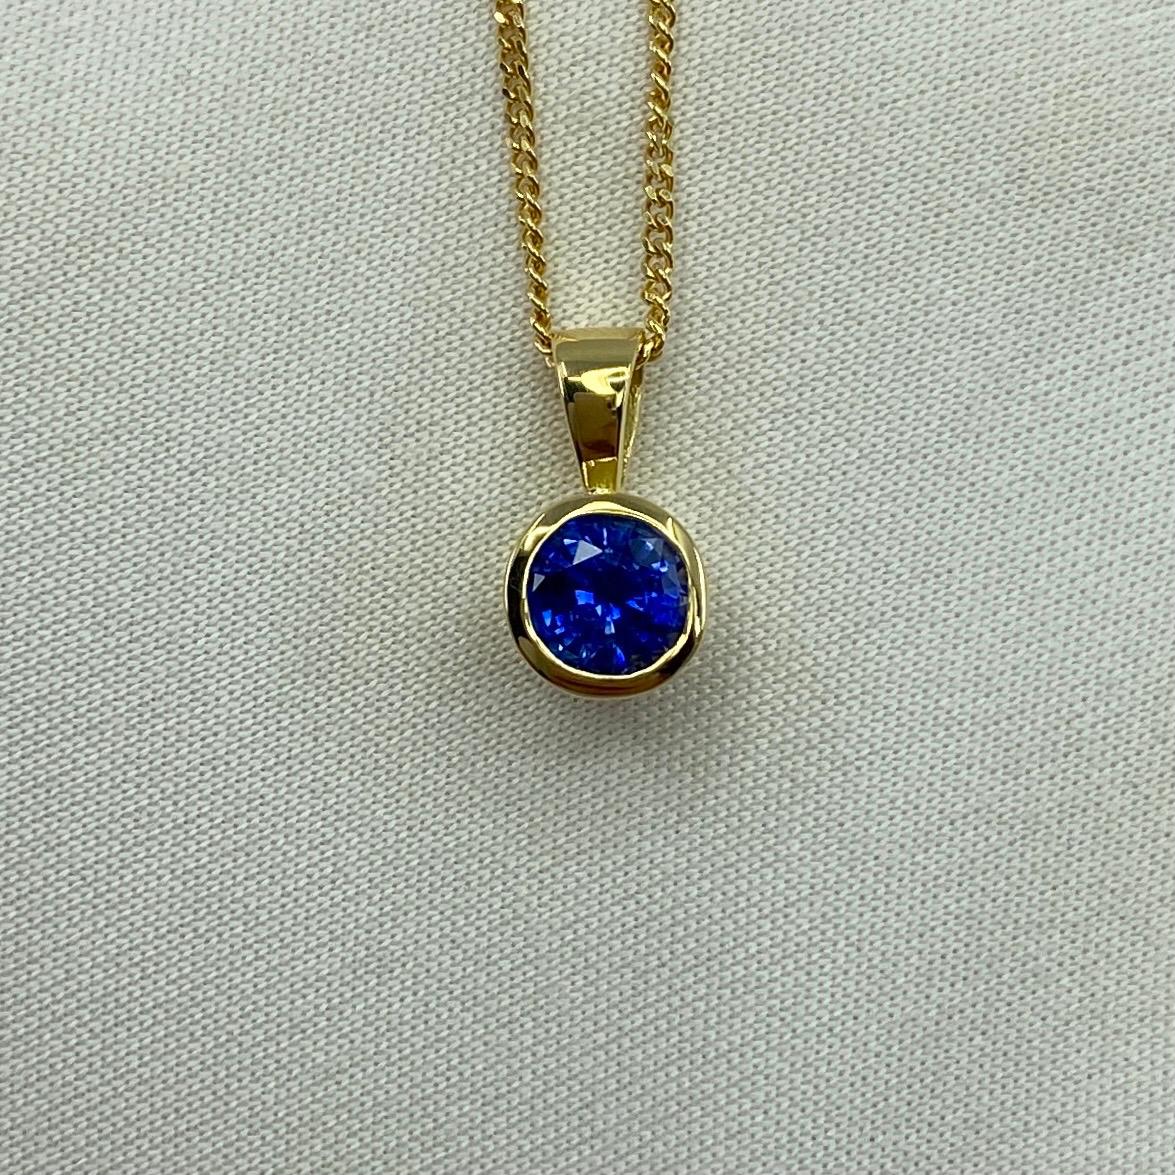 Fine Cornflower Blue Ceylon Sapphire 18k Yellow Gold Pendant.

0.80 Carat round cut sapphire with a stunning vivid cornflower blue colour and excellent clarity. Very clean stone with only some small natural inclusions visible when looking closely.